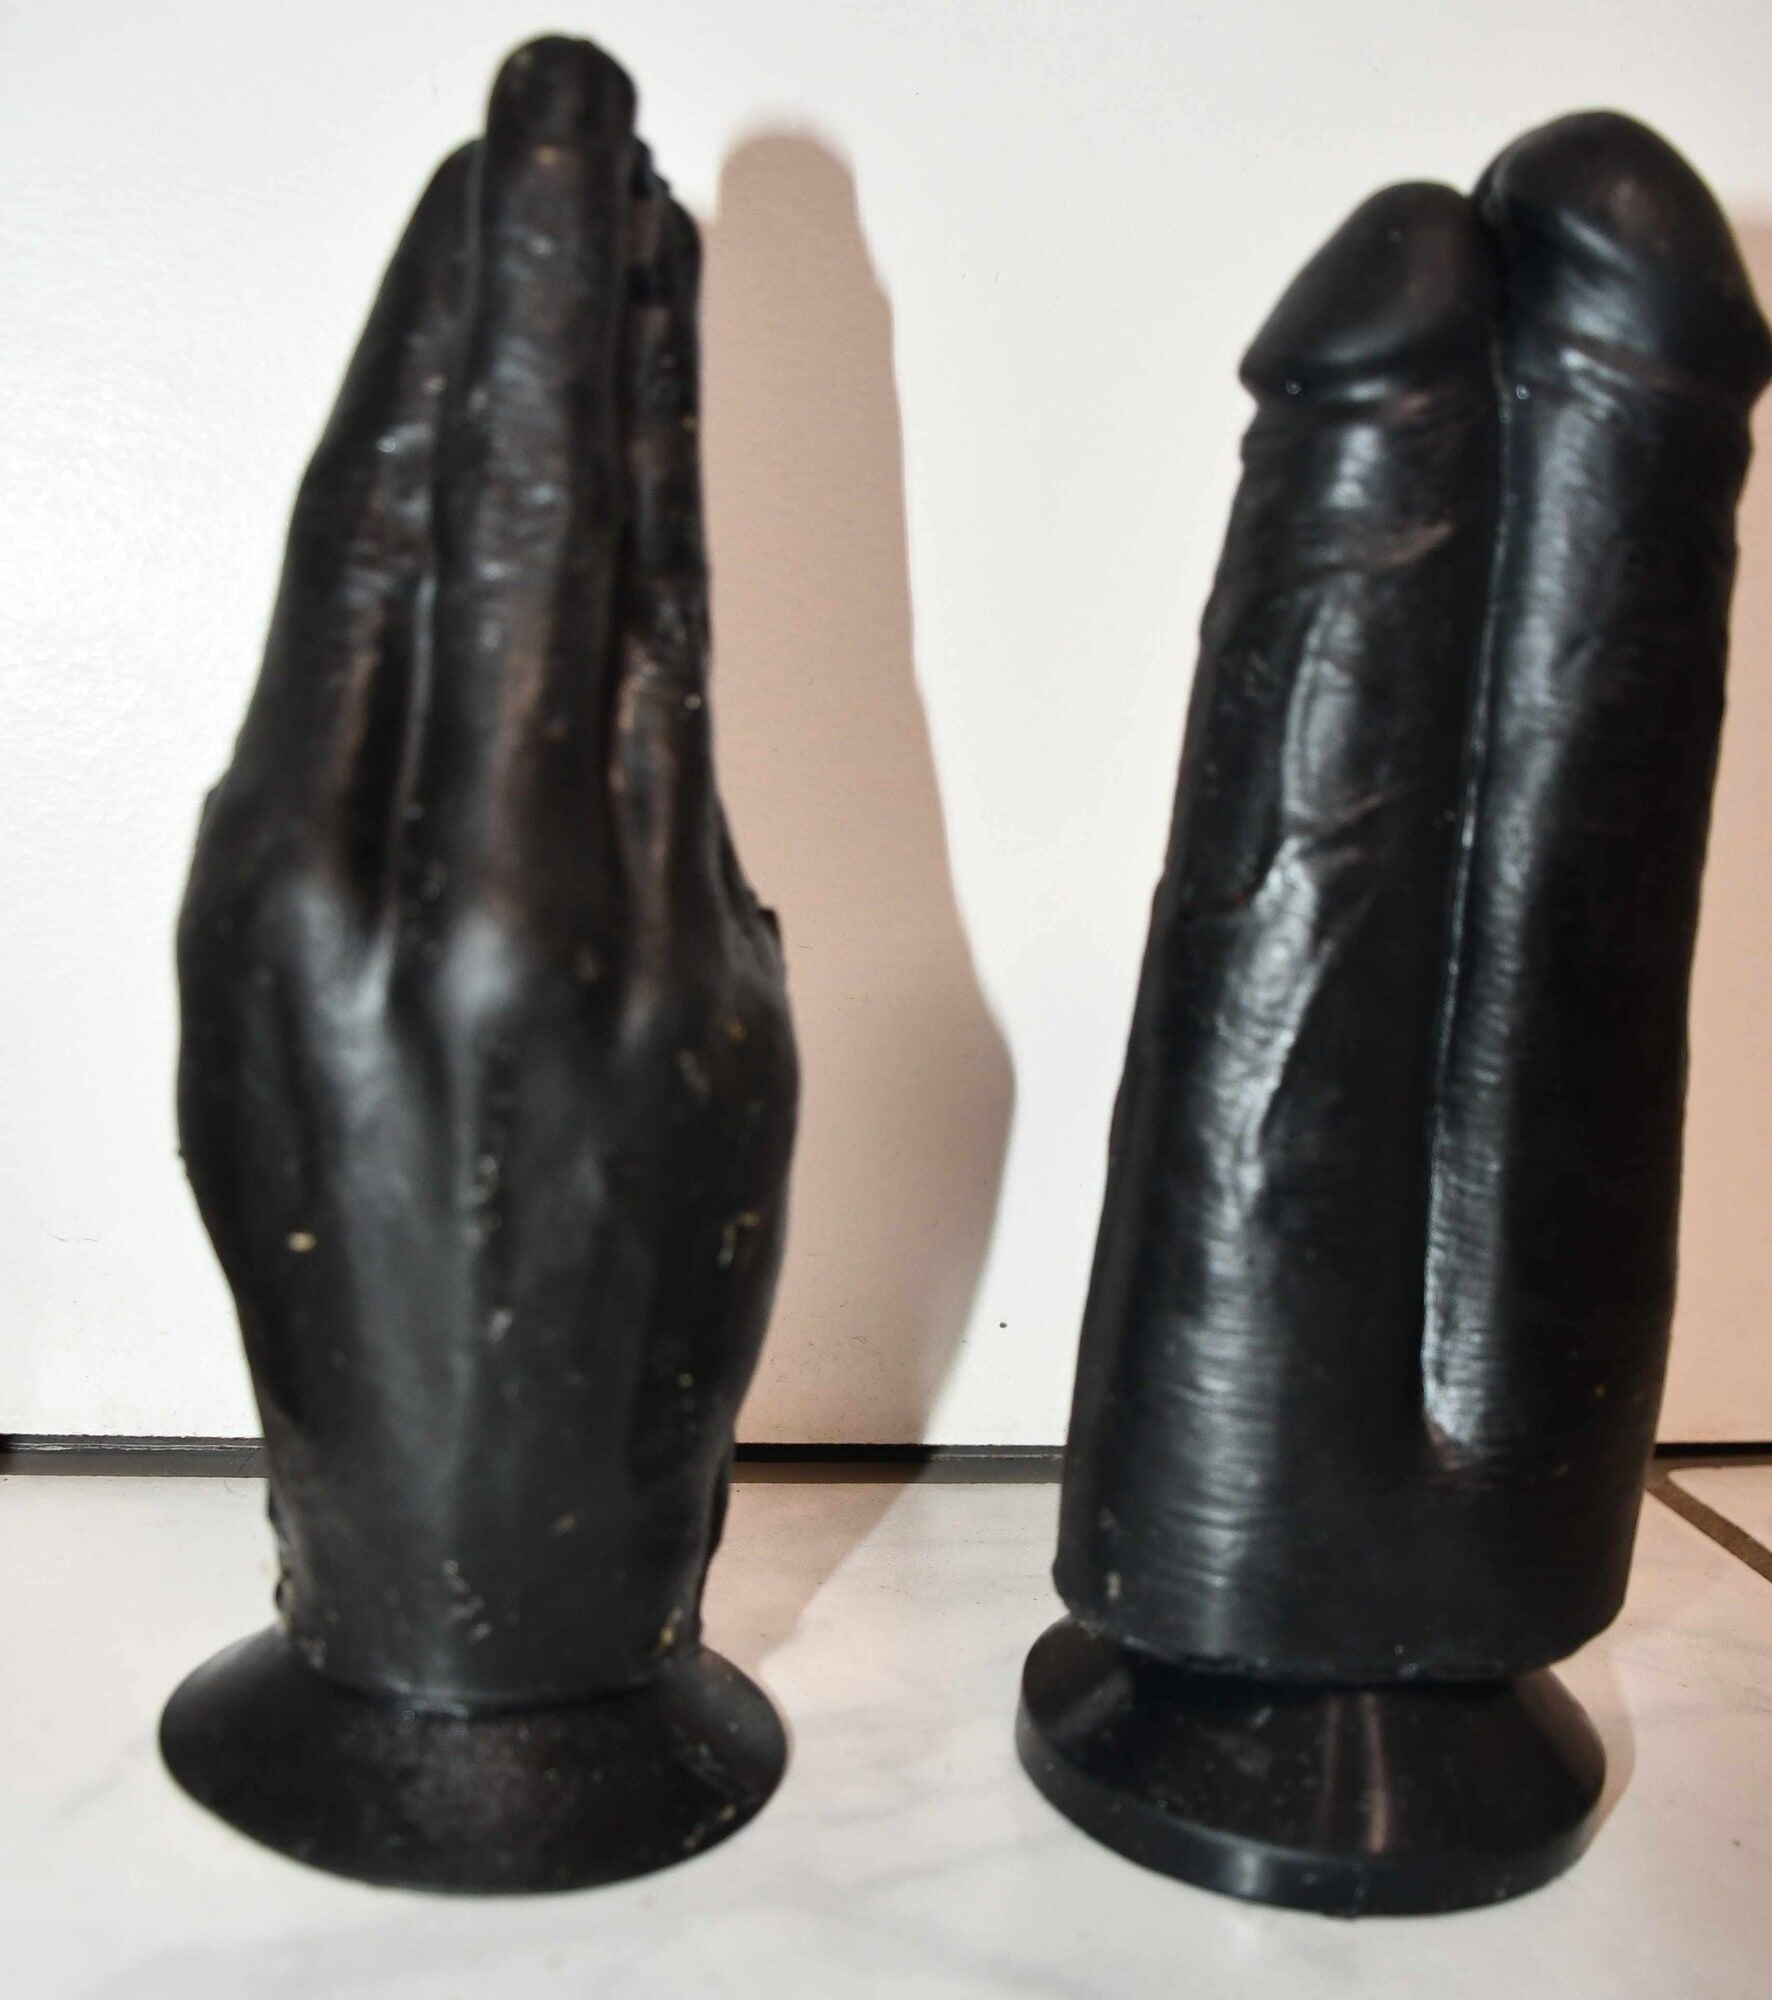 My toy and dildo collection #21